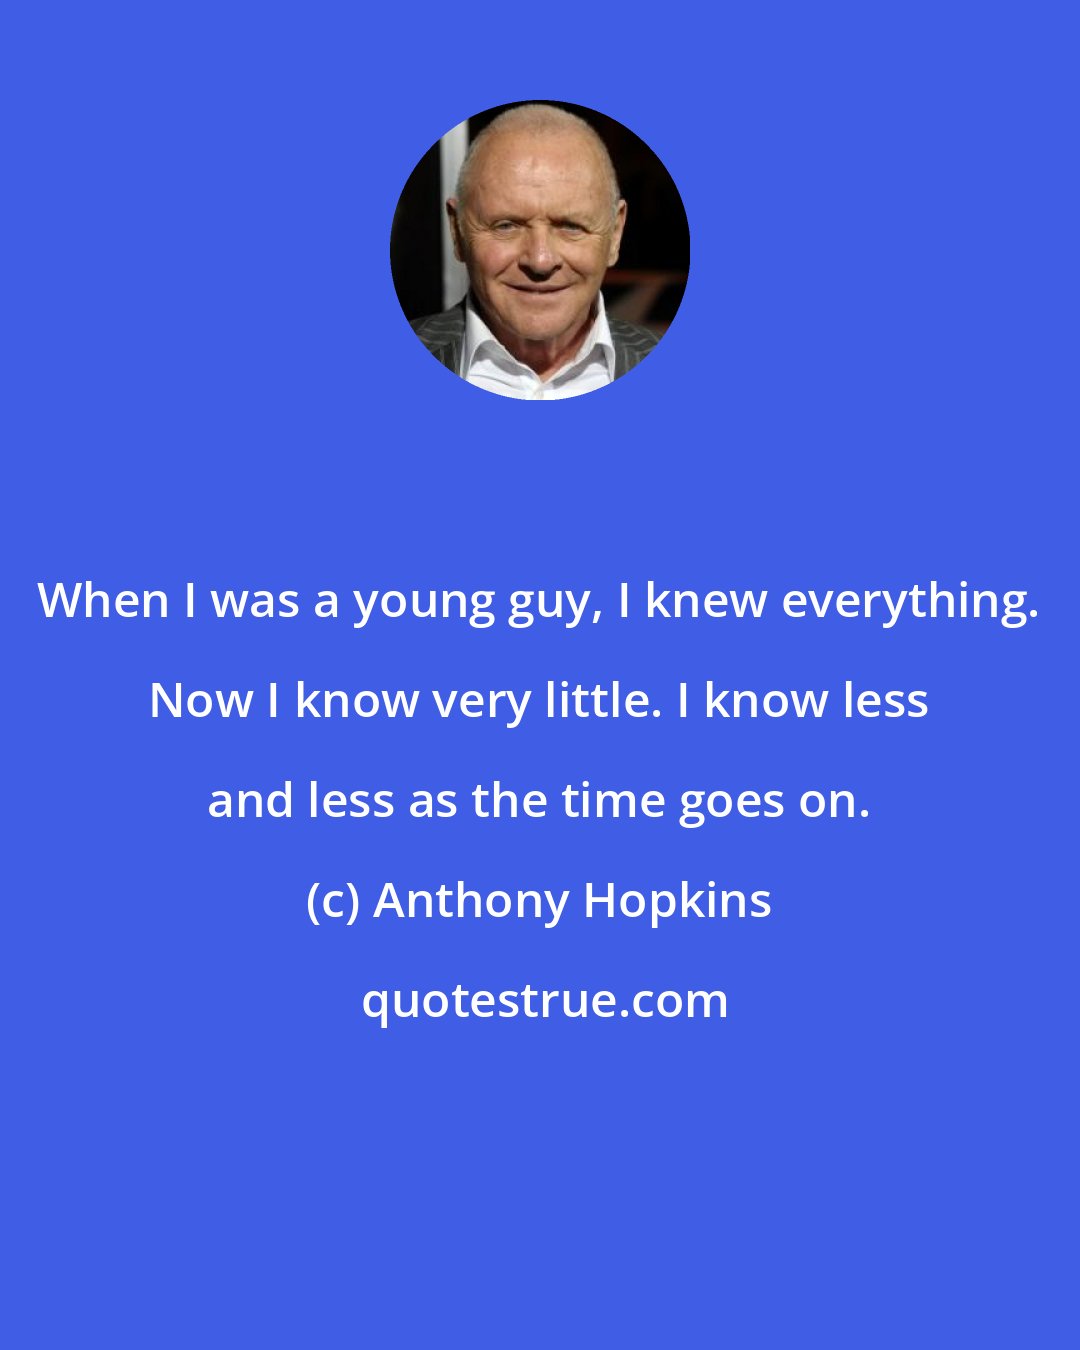 Anthony Hopkins: When I was a young guy, I knew everything. Now I know very little. I know less and less as the time goes on.